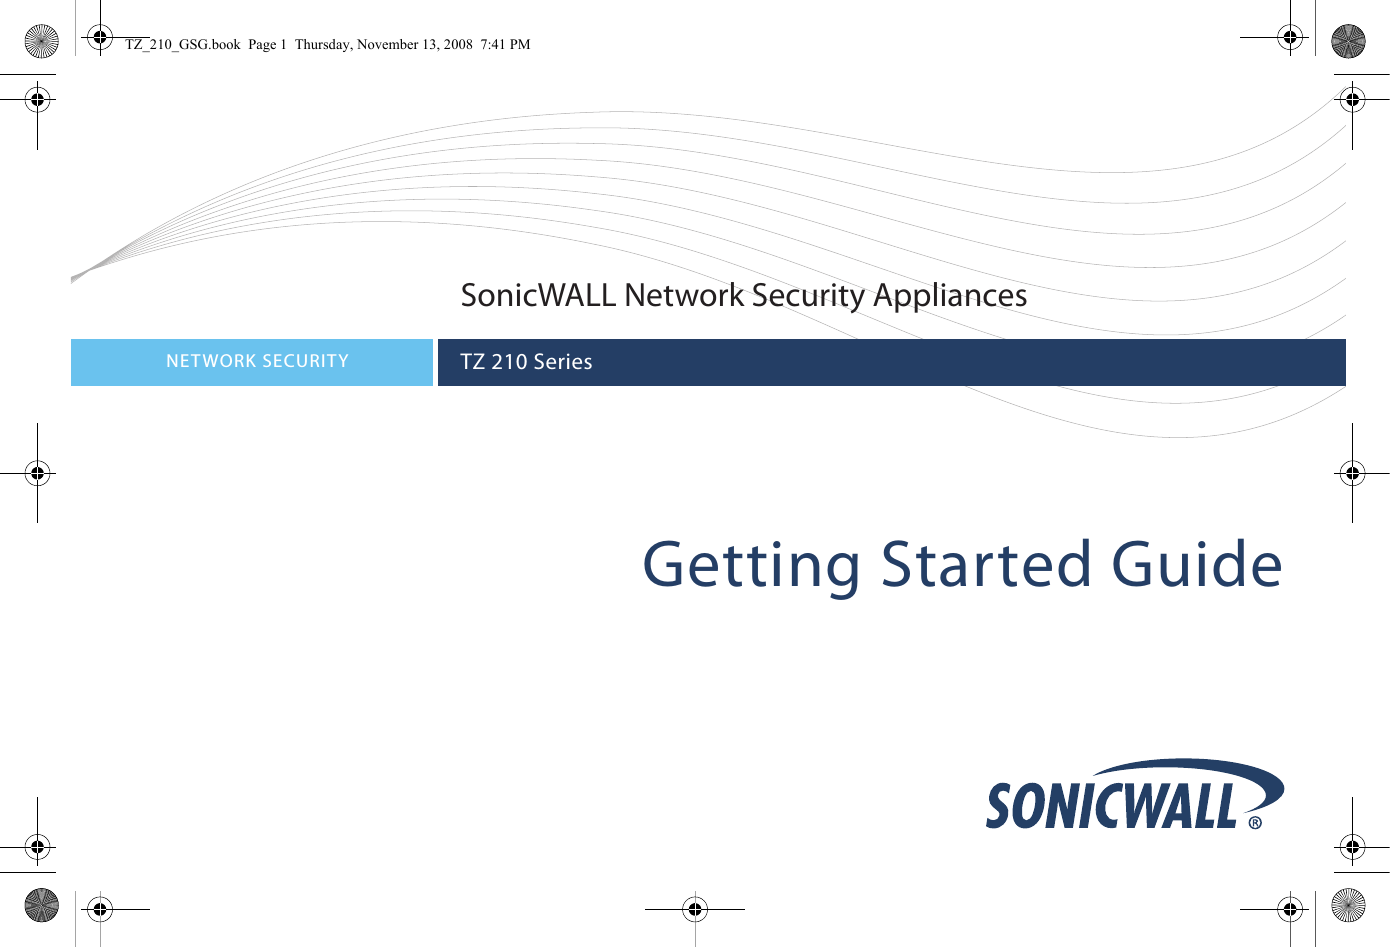 Getting Started GuideSonicWALL Network Security AppliancesNETWORK SECURITYTZ 210 SeriesTZ_210_GSG.book  Page 1  Thursday, November 13, 2008  7:41 PM